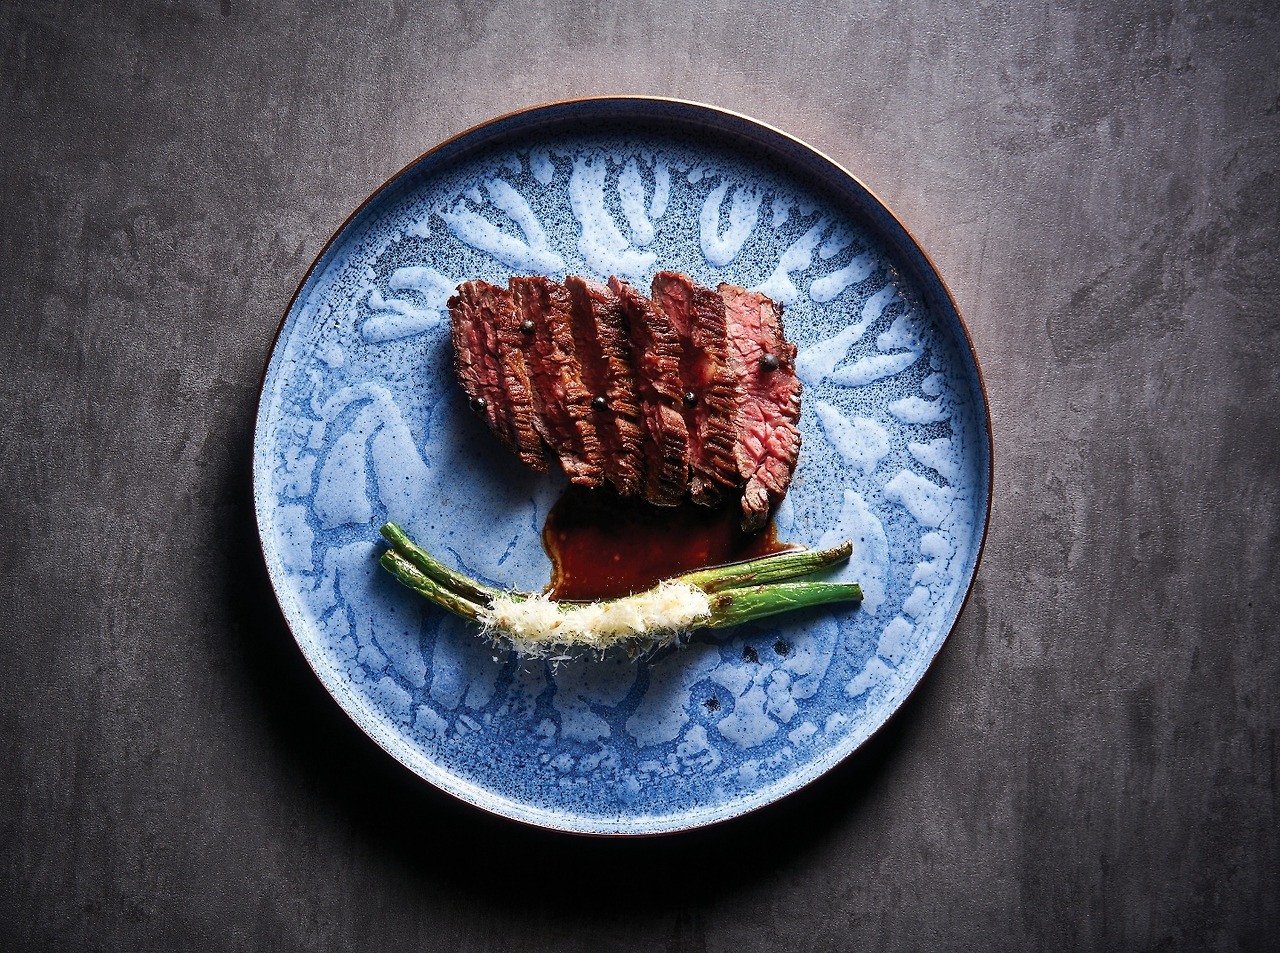 Smoked Skirt Steak with grilled garlic stems (Pic: RIPE)